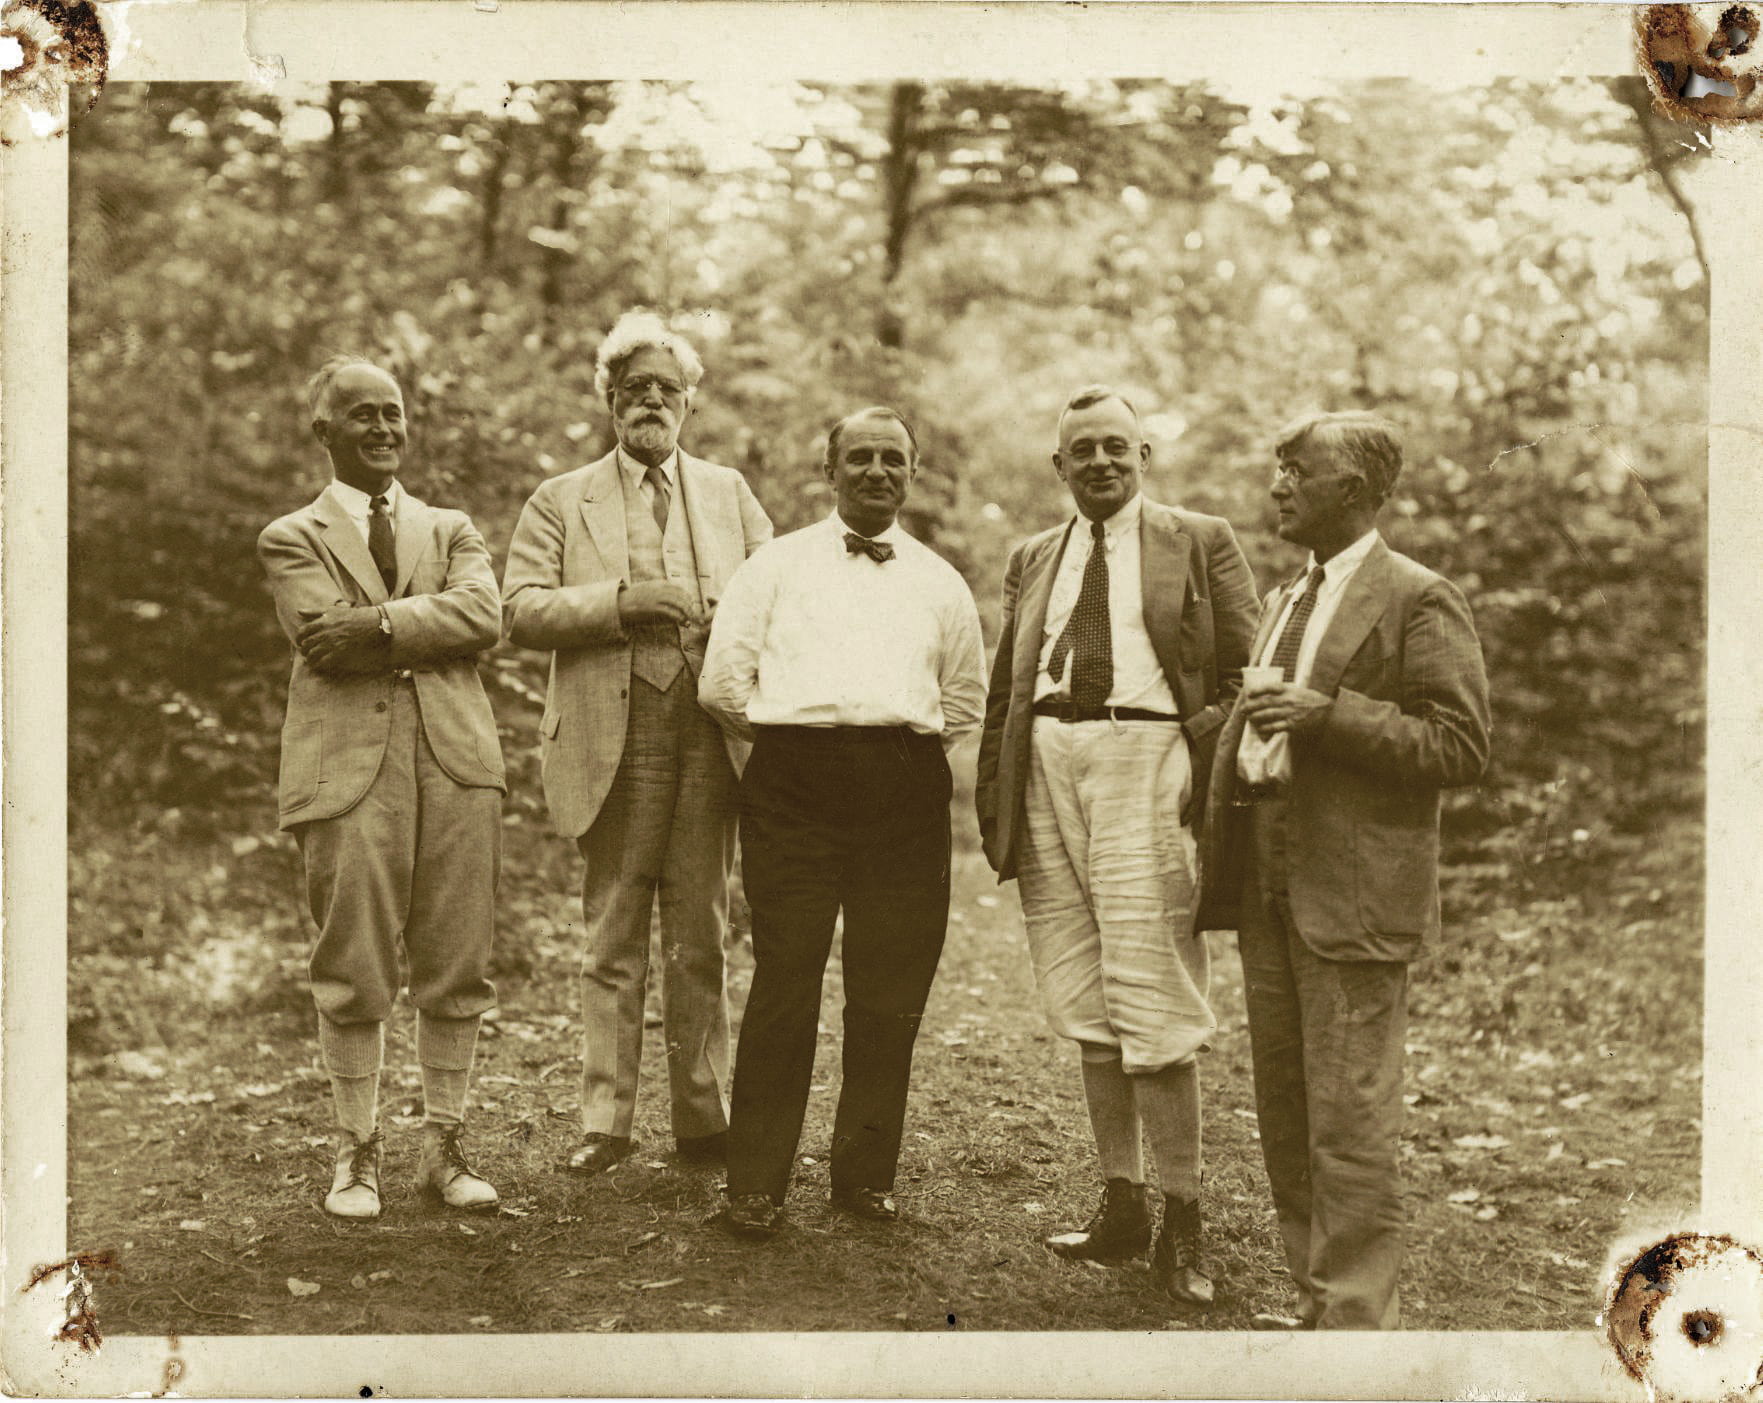 photograph of John S. Apperson and colleagues